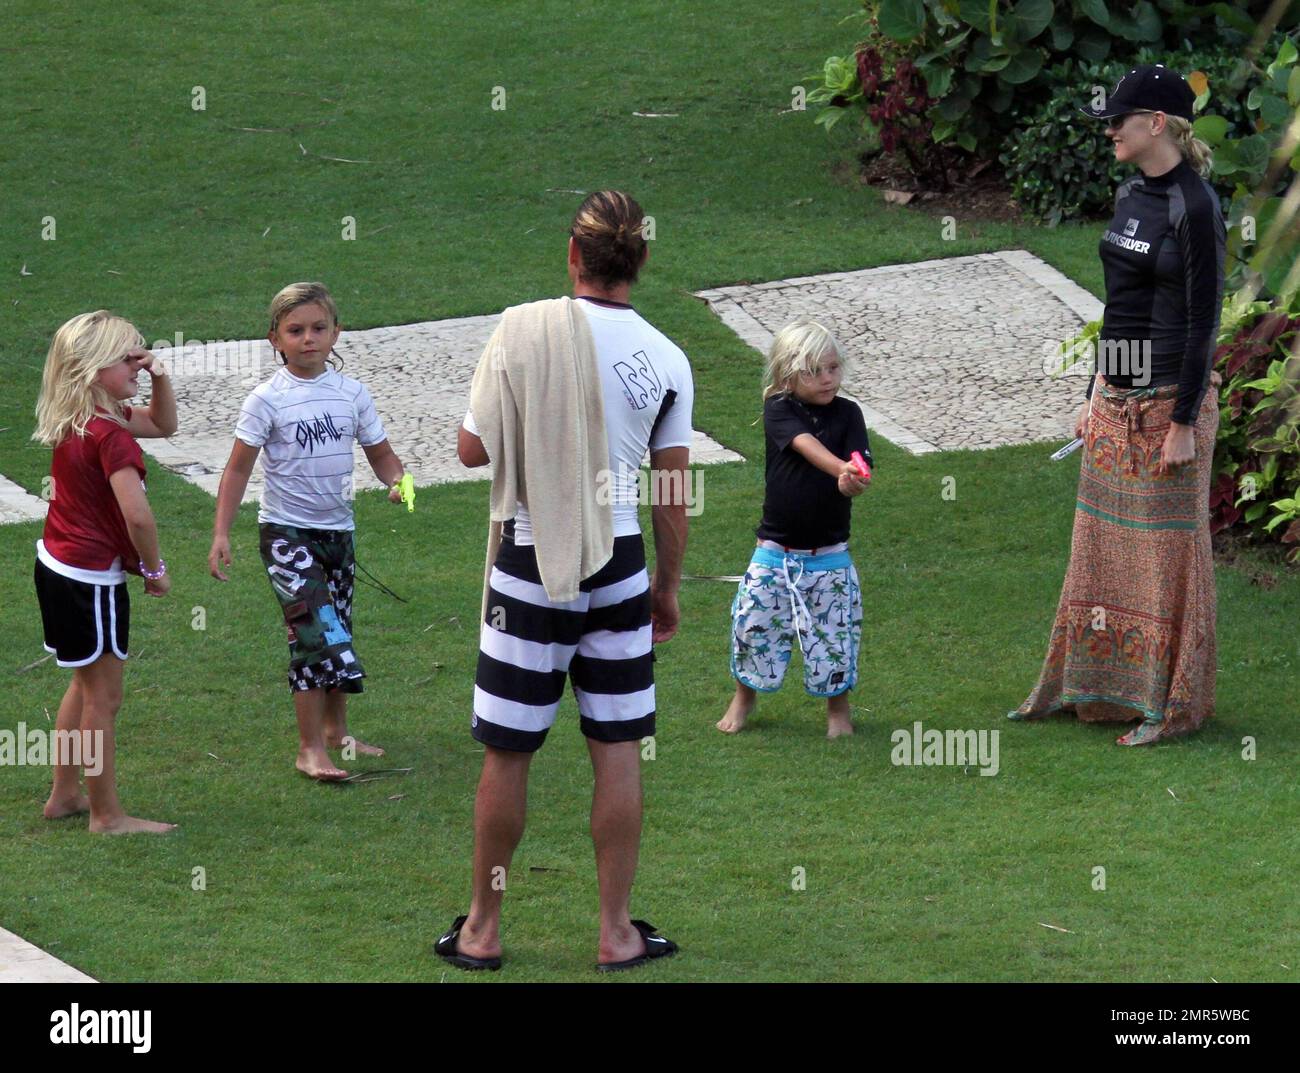 EXCLUSIVE!! Gwen Stefani, husband Gavin Rossdale and the couple's two children Kingston and Zuma spend a fun afternoon playing American Football on the lawn of their luxury hotel. Gavin tried to show Gwen how to throw the ball properly while the boys were more interested in playing in the fountain and filling up their water pistols. Gwen stayed covered up in a surfer's top, baseball cap and sarong and stayed in the shade as much as possible. She was also spotted texting and checking her messages on her iPhone while Gavin played with the kids. The family are spending time together ahead of Gavi Stock Photo